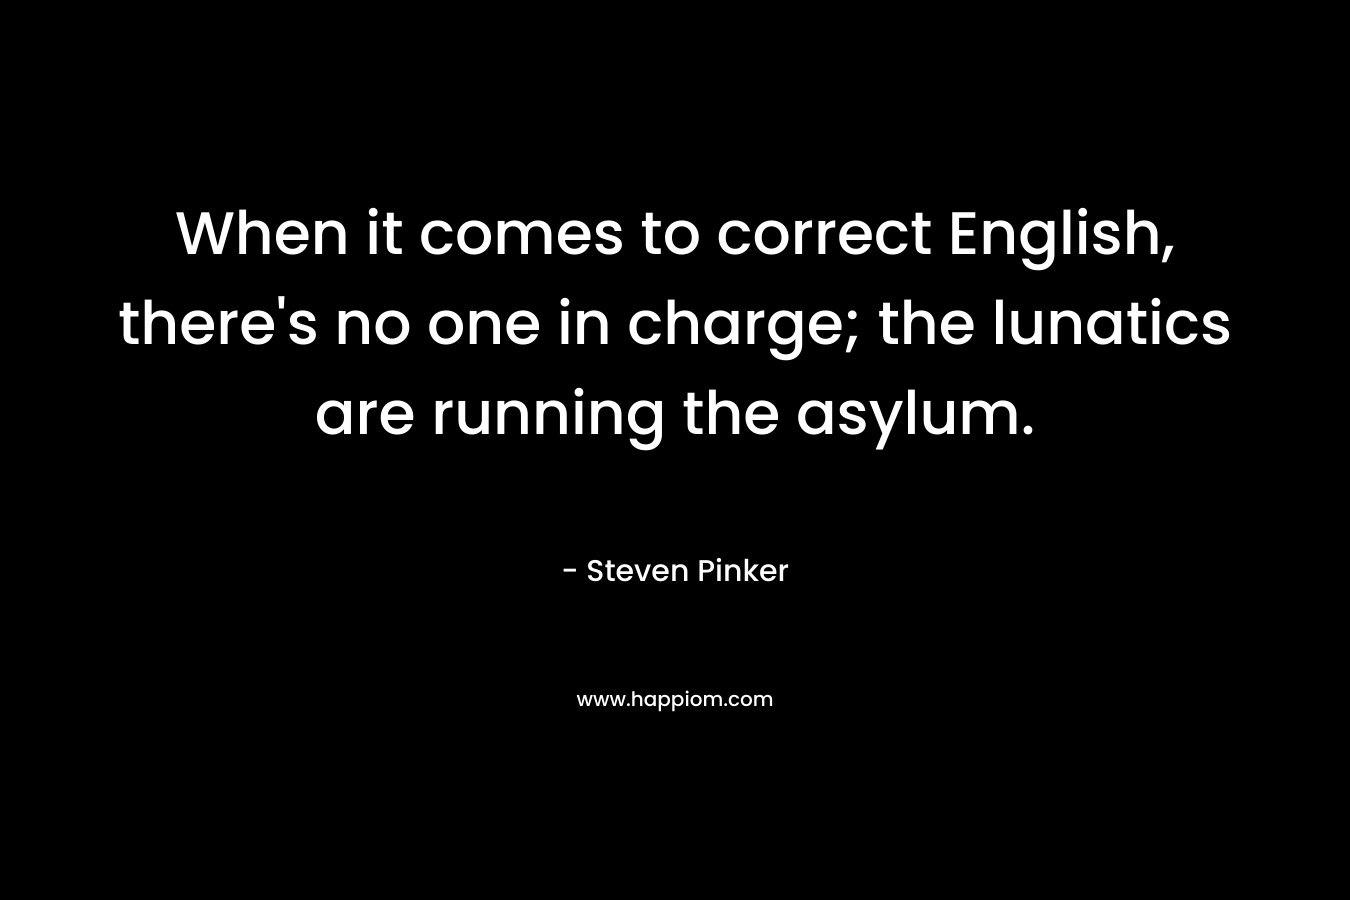 When it comes to correct English, there’s no one in charge; the lunatics are running the asylum. – Steven Pinker